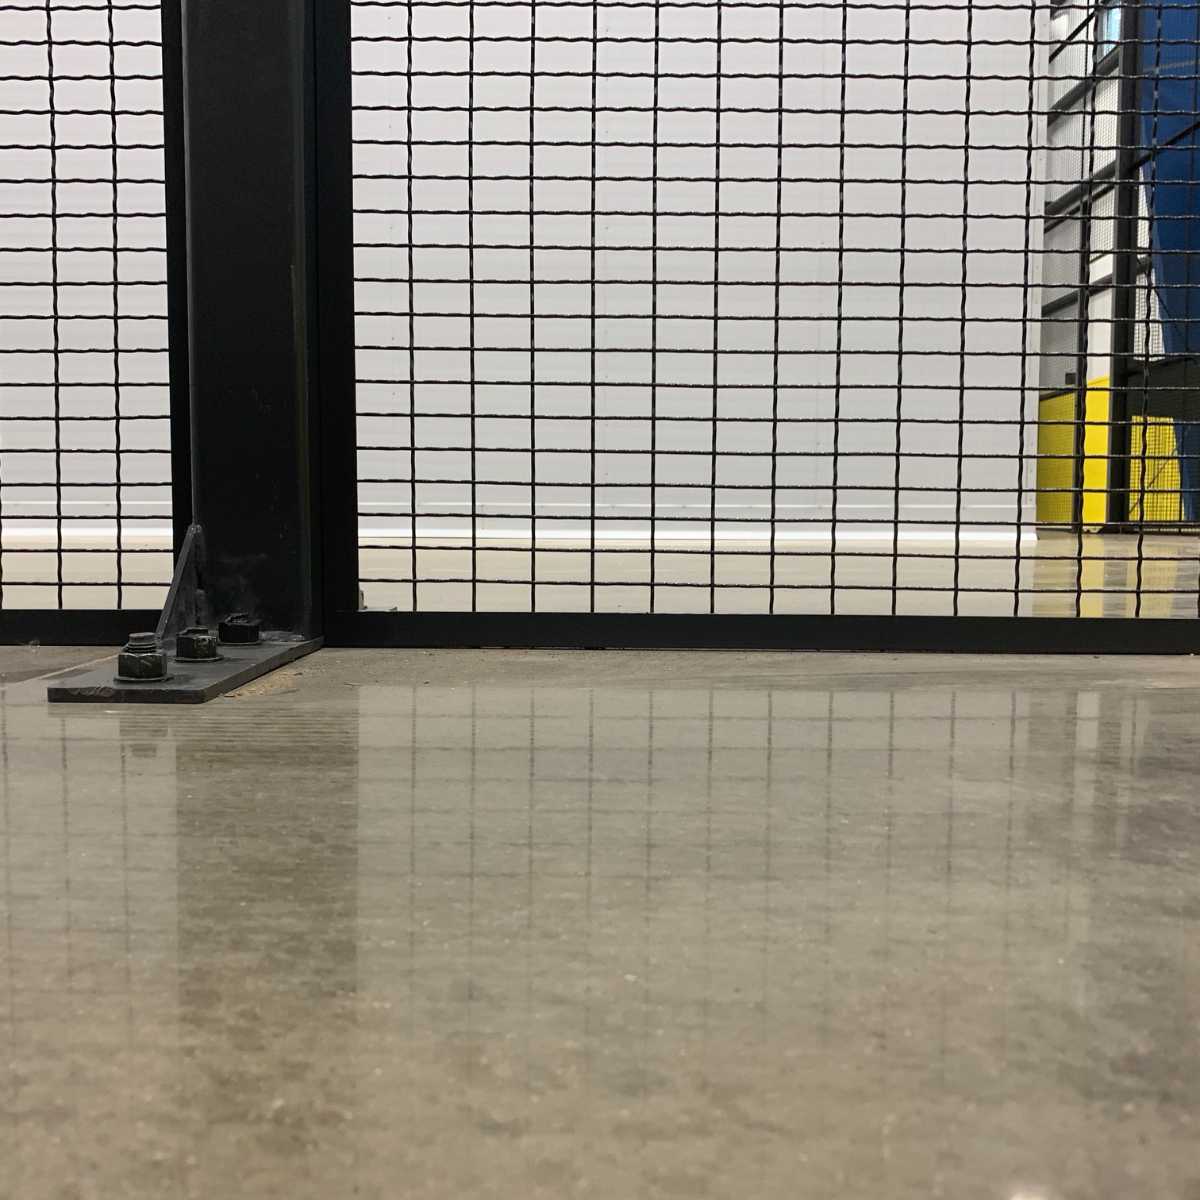 840 black mesh panel bolted into concrete floor